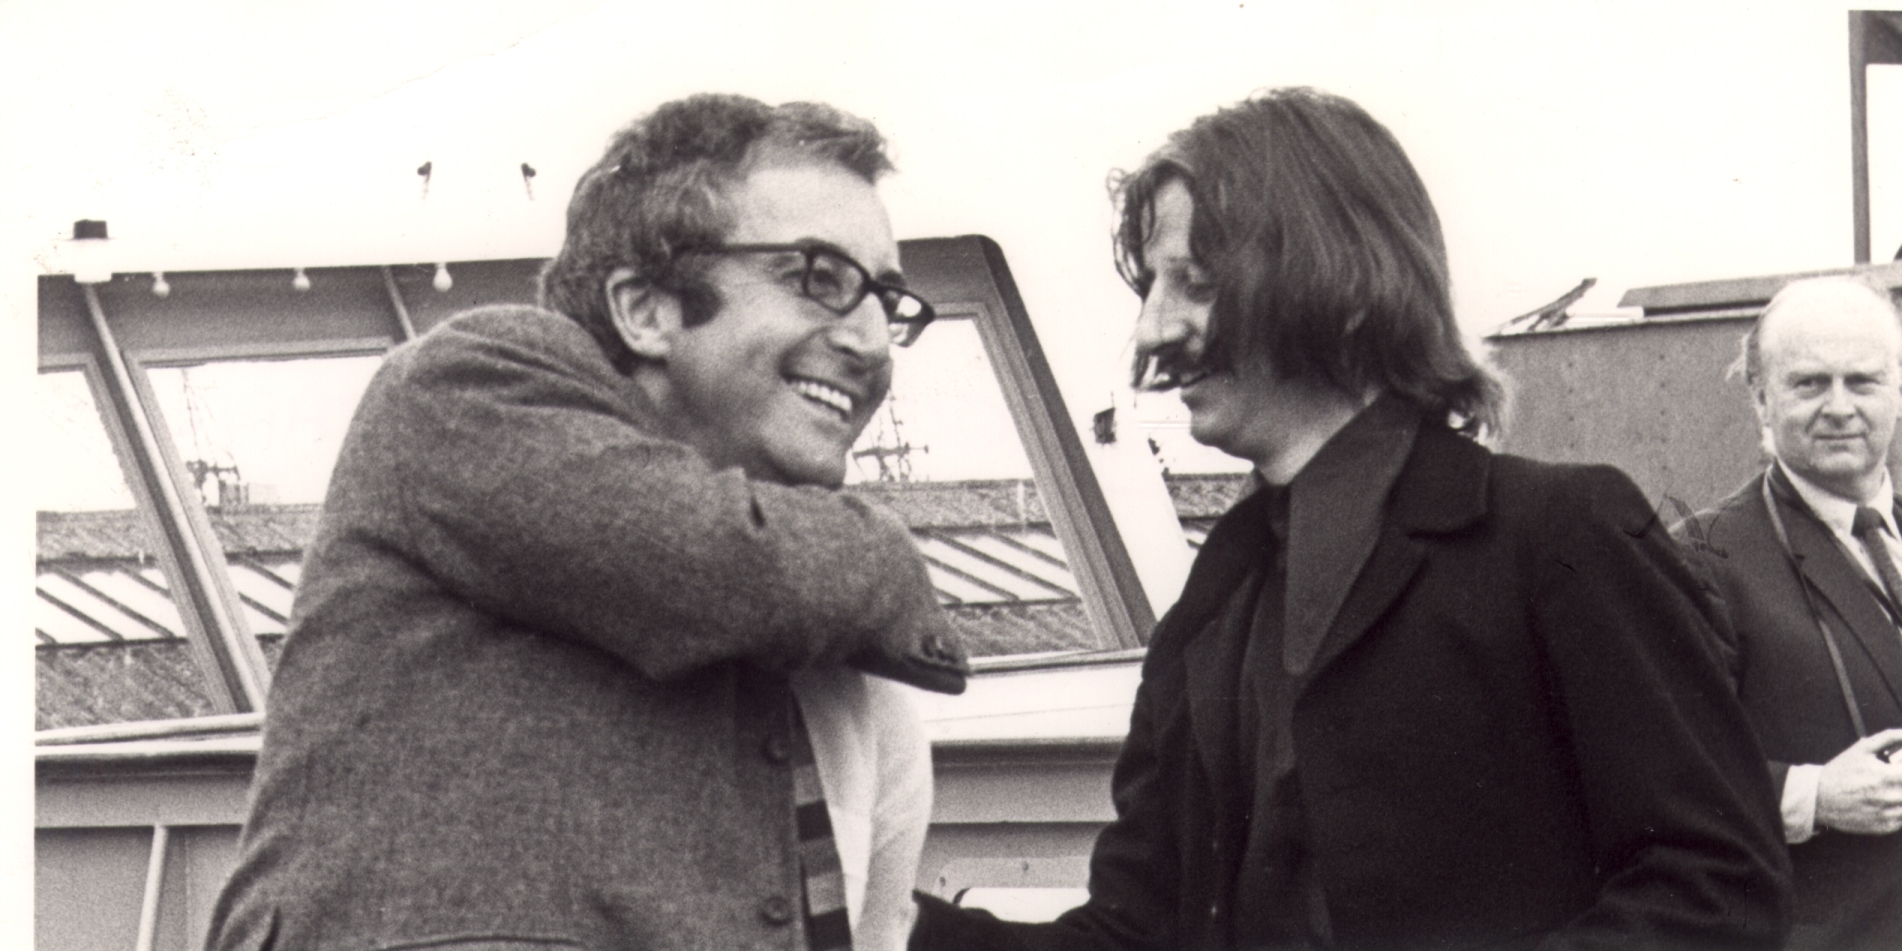 Peter Sellers and Ringo Starr 3/11/70